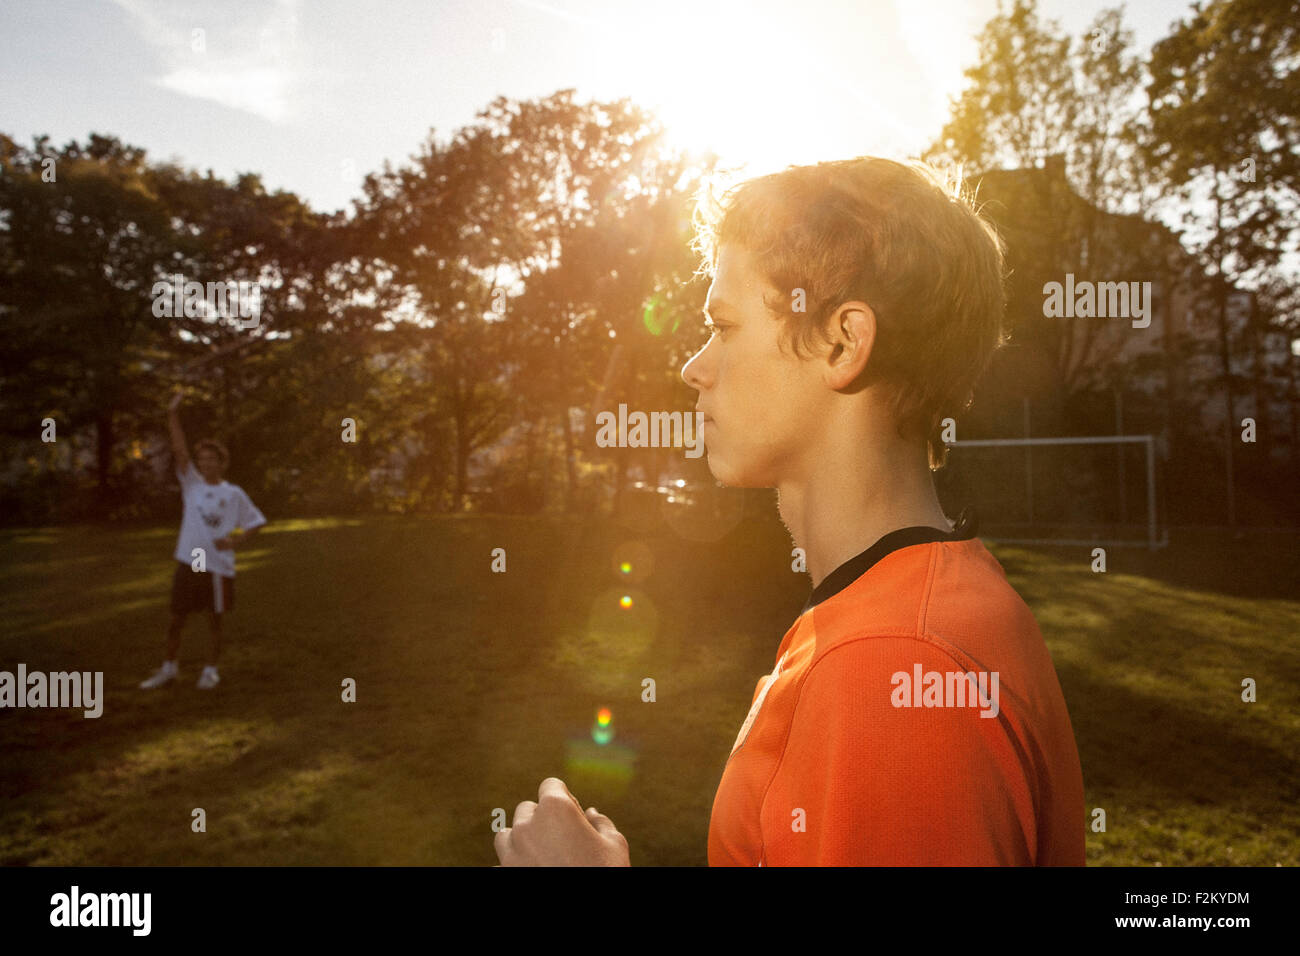 Teenager on soccer pitch Stock Photo